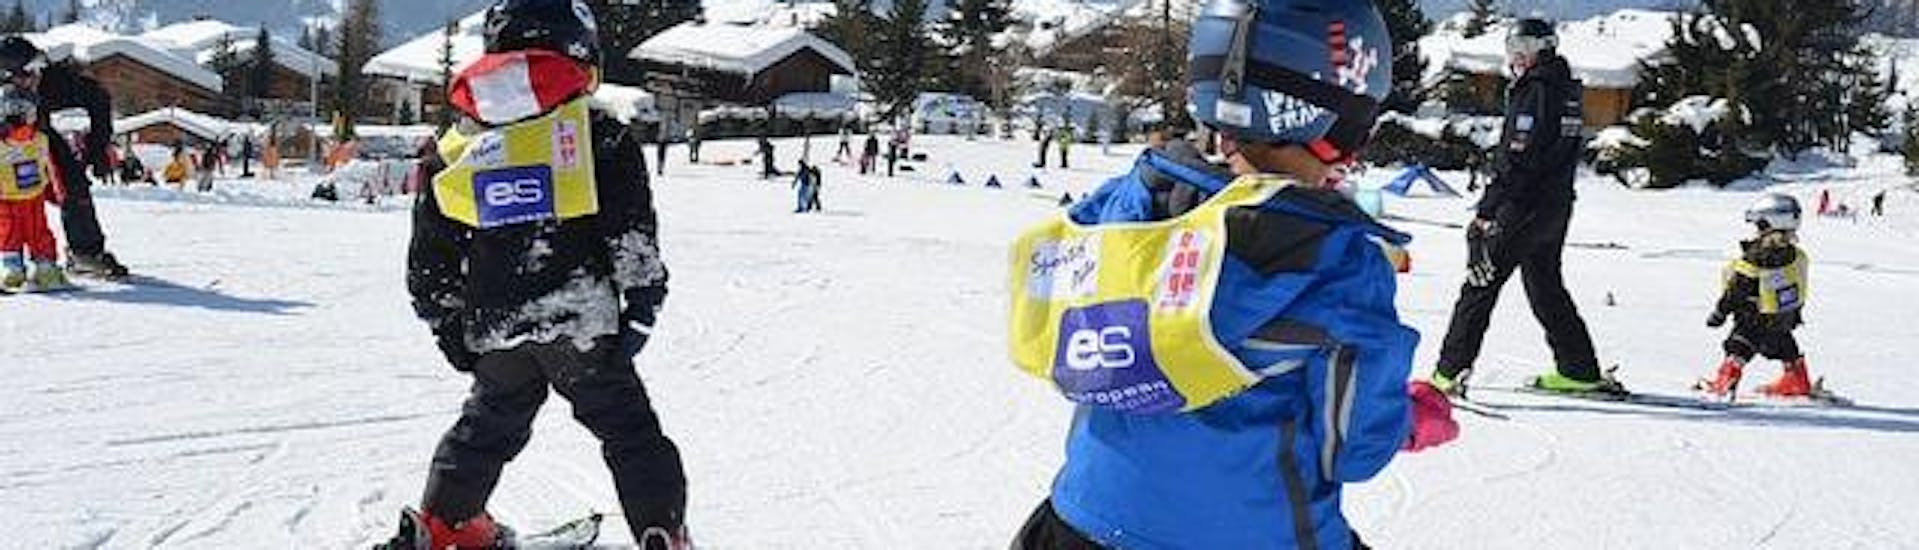 Kids Ski Lessons (6-12 y.) for Advanced Skiers with European Snowsport Verbier - Hero image